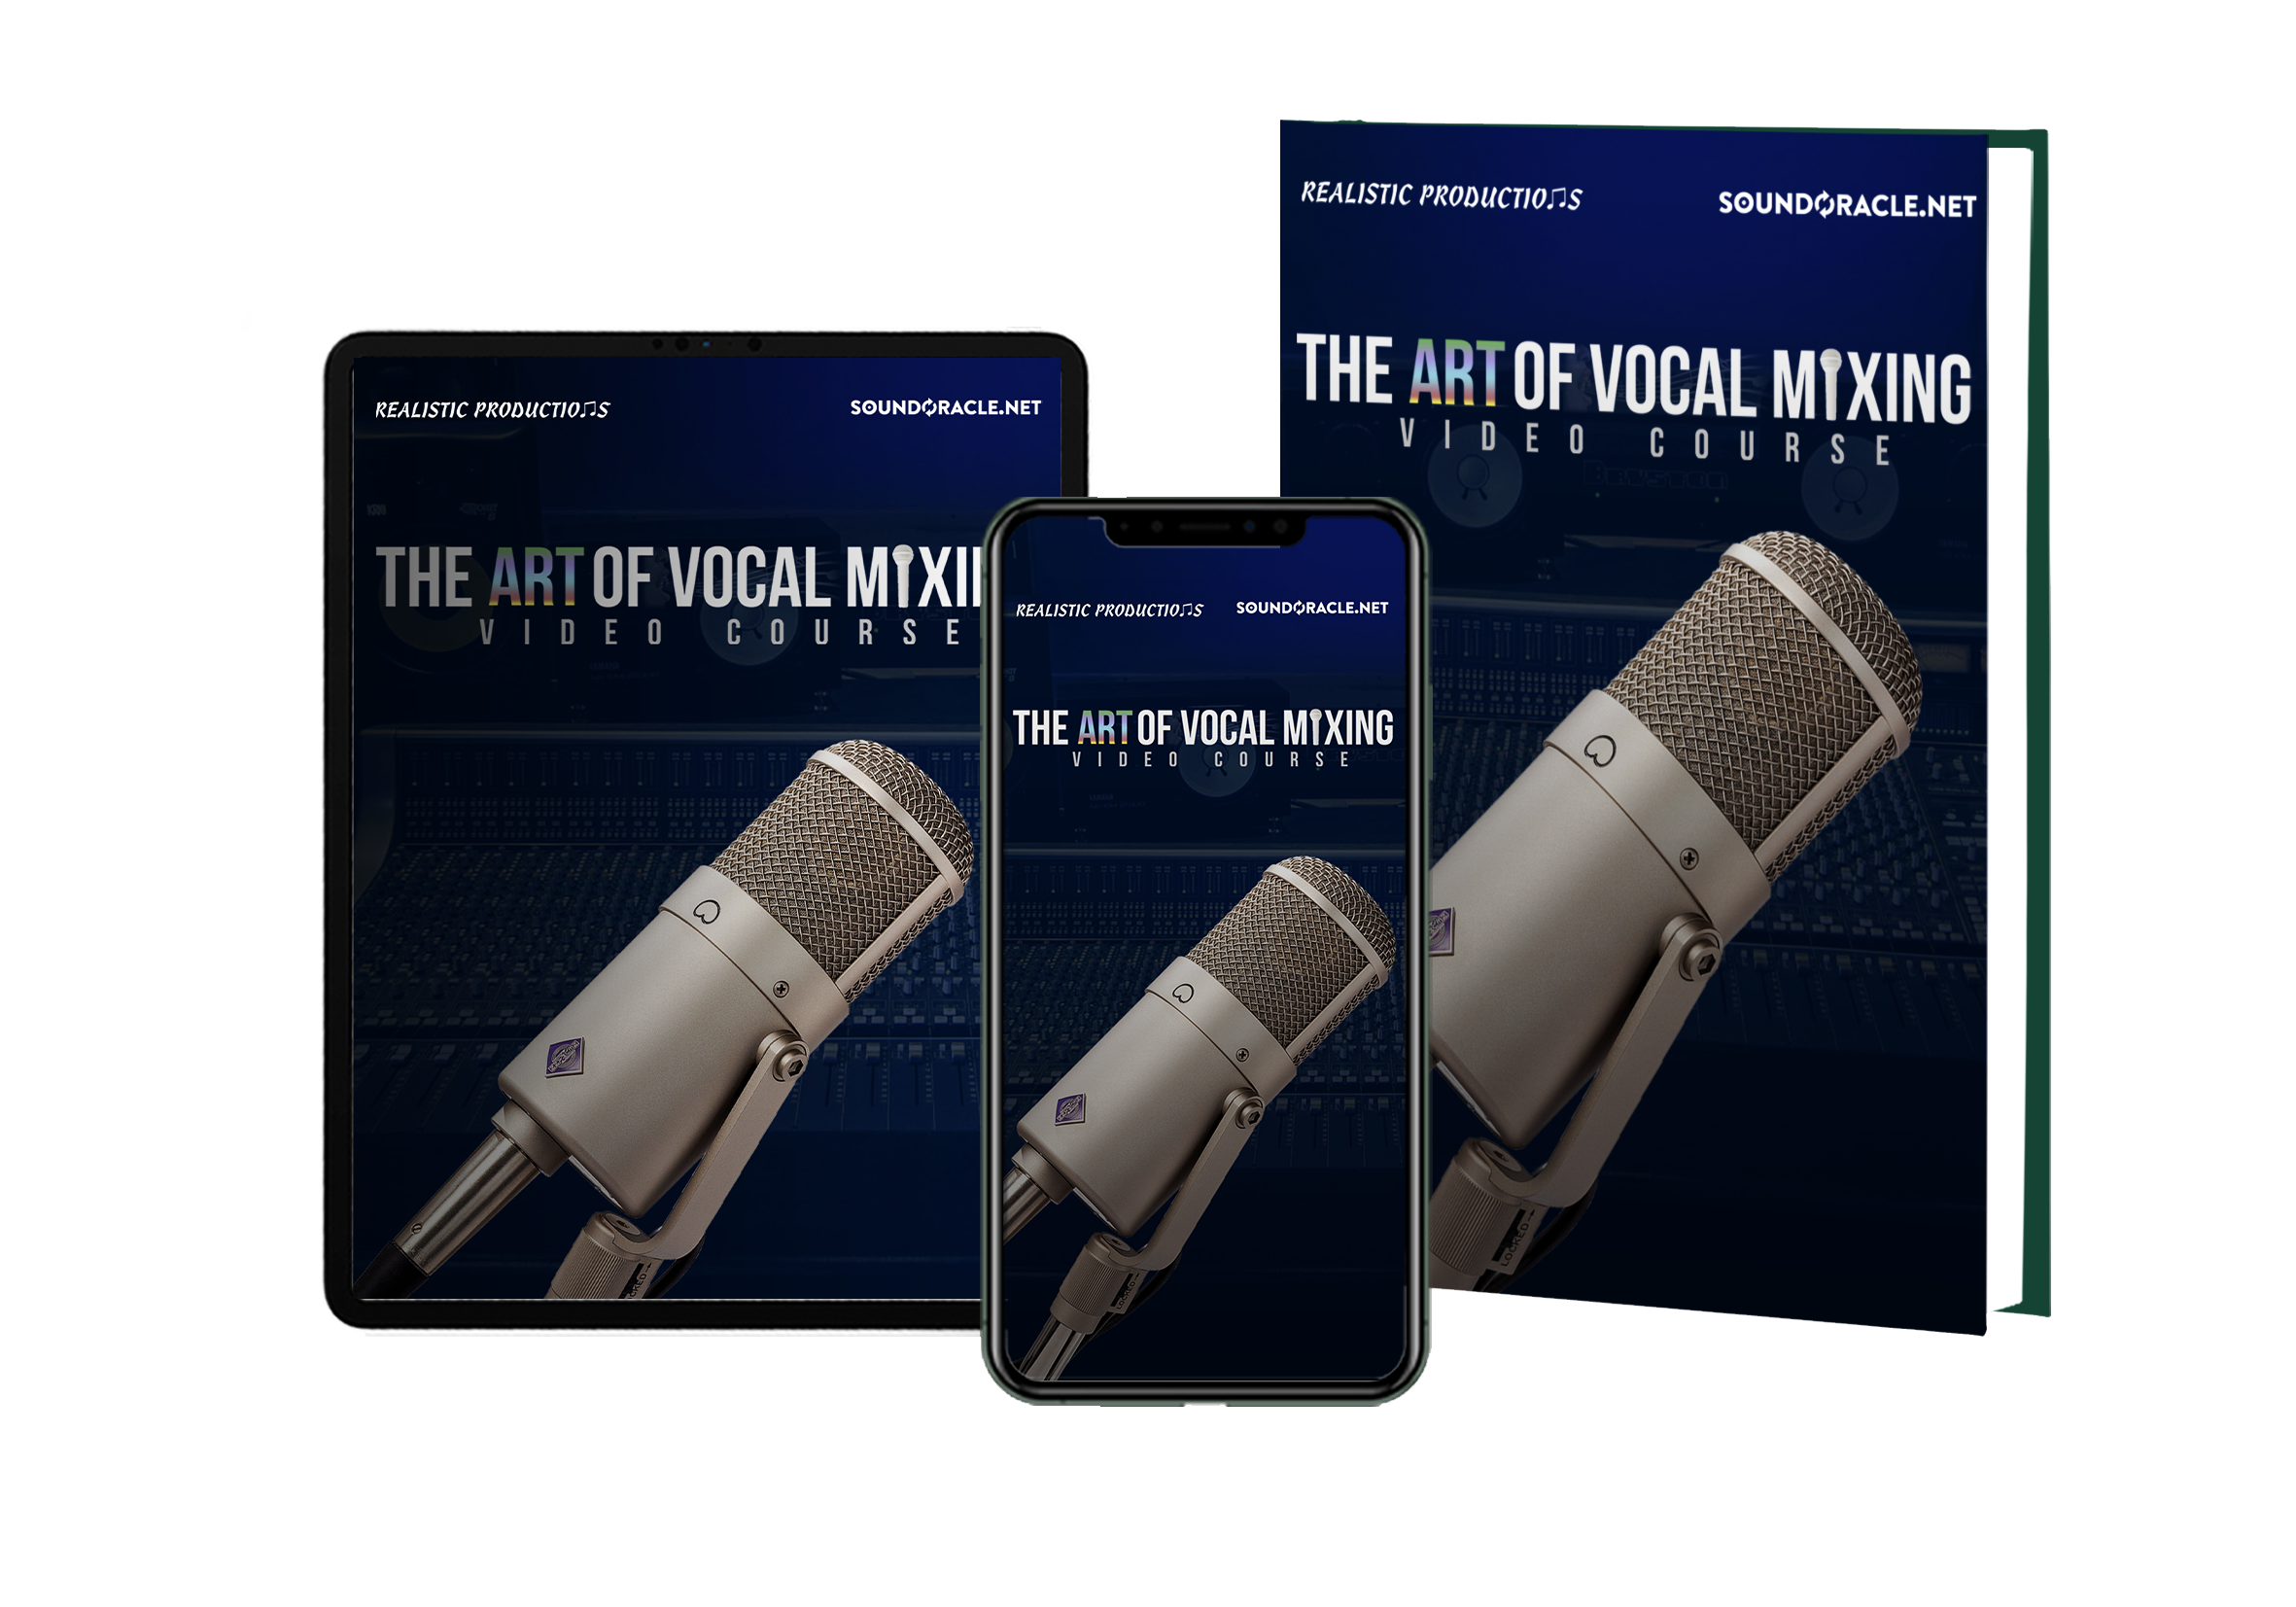 The Art of Vocal Mixing